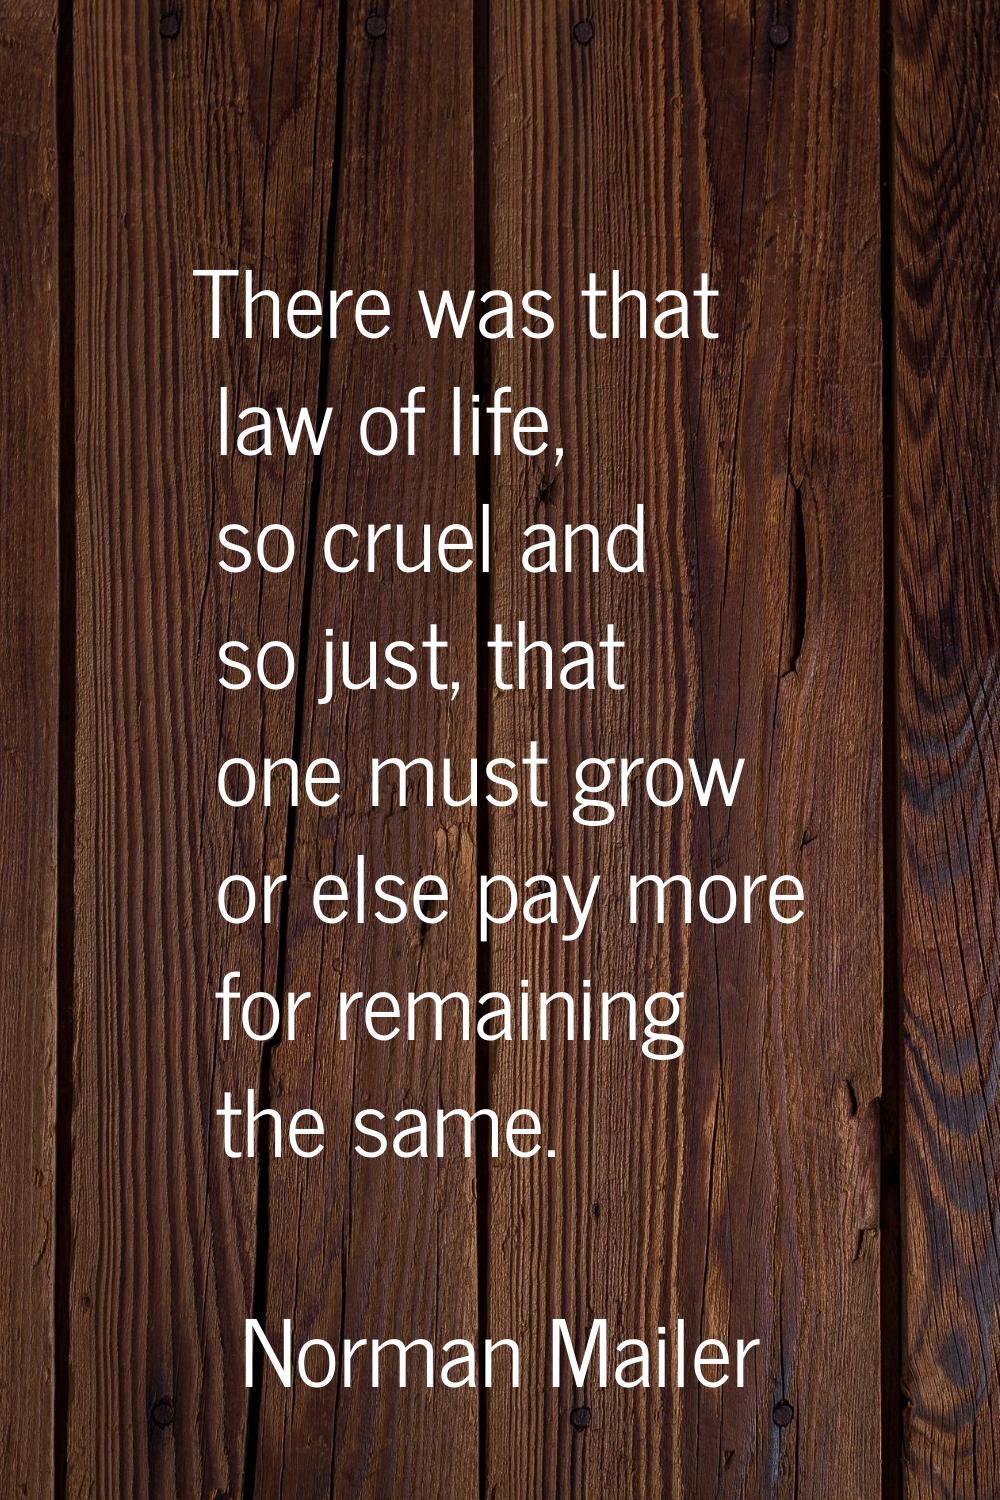 There was that law of life, so cruel and so just, that one must grow or else pay more for remaining